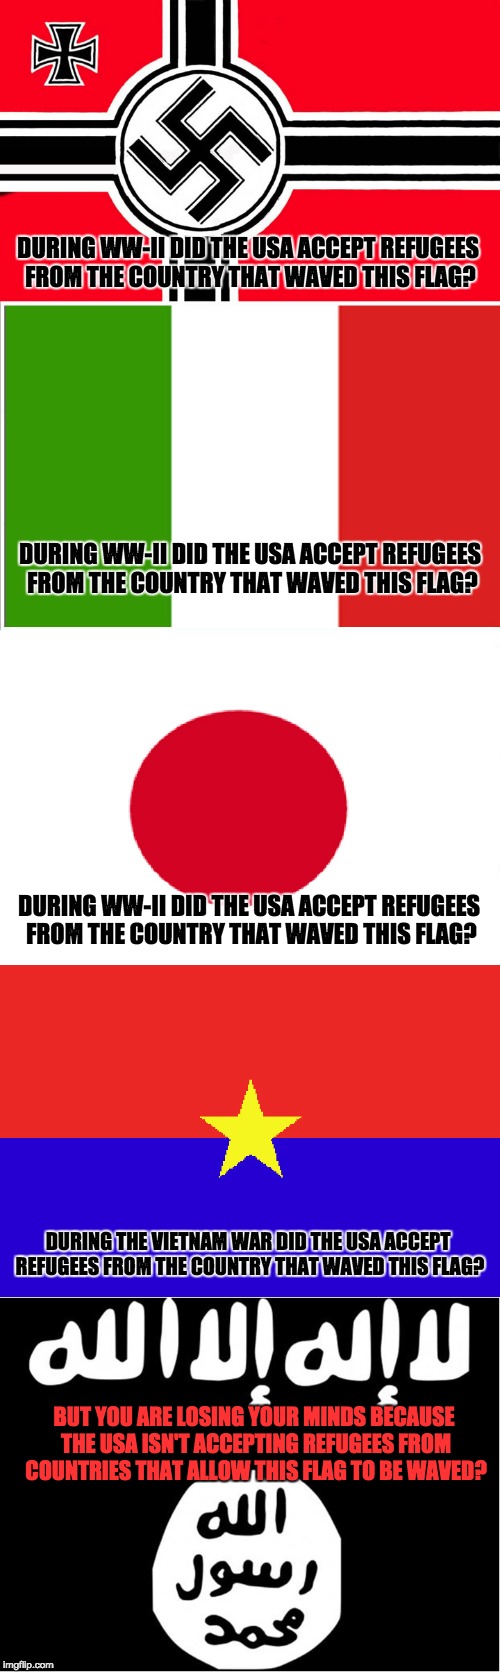 Accept refugees from Islamist Countries? | DURING WW-II DID THE USA ACCEPT REFUGEES FROM THE COUNTRY THAT WAVED THIS FLAG? DURING WW-II DID THE USA ACCEPT REFUGEES FROM THE COUNTRY THAT WAVED THIS FLAG? DURING WW-II DID THE USA ACCEPT REFUGEES FROM THE COUNTRY THAT WAVED THIS FLAG? DURING THE VIETNAM WAR DID THE USA ACCEPT REFUGEES FROM THE COUNTRY THAT WAVED THIS FLAG? BUT YOU ARE LOSING YOUR MINDS BECAUSE THE USA ISN'T ACCEPTING REFUGEES FROM COUNTRIES THAT ALLOW THIS FLAG TO BE WAVED? | image tagged in isis,terrorism | made w/ Imgflip meme maker